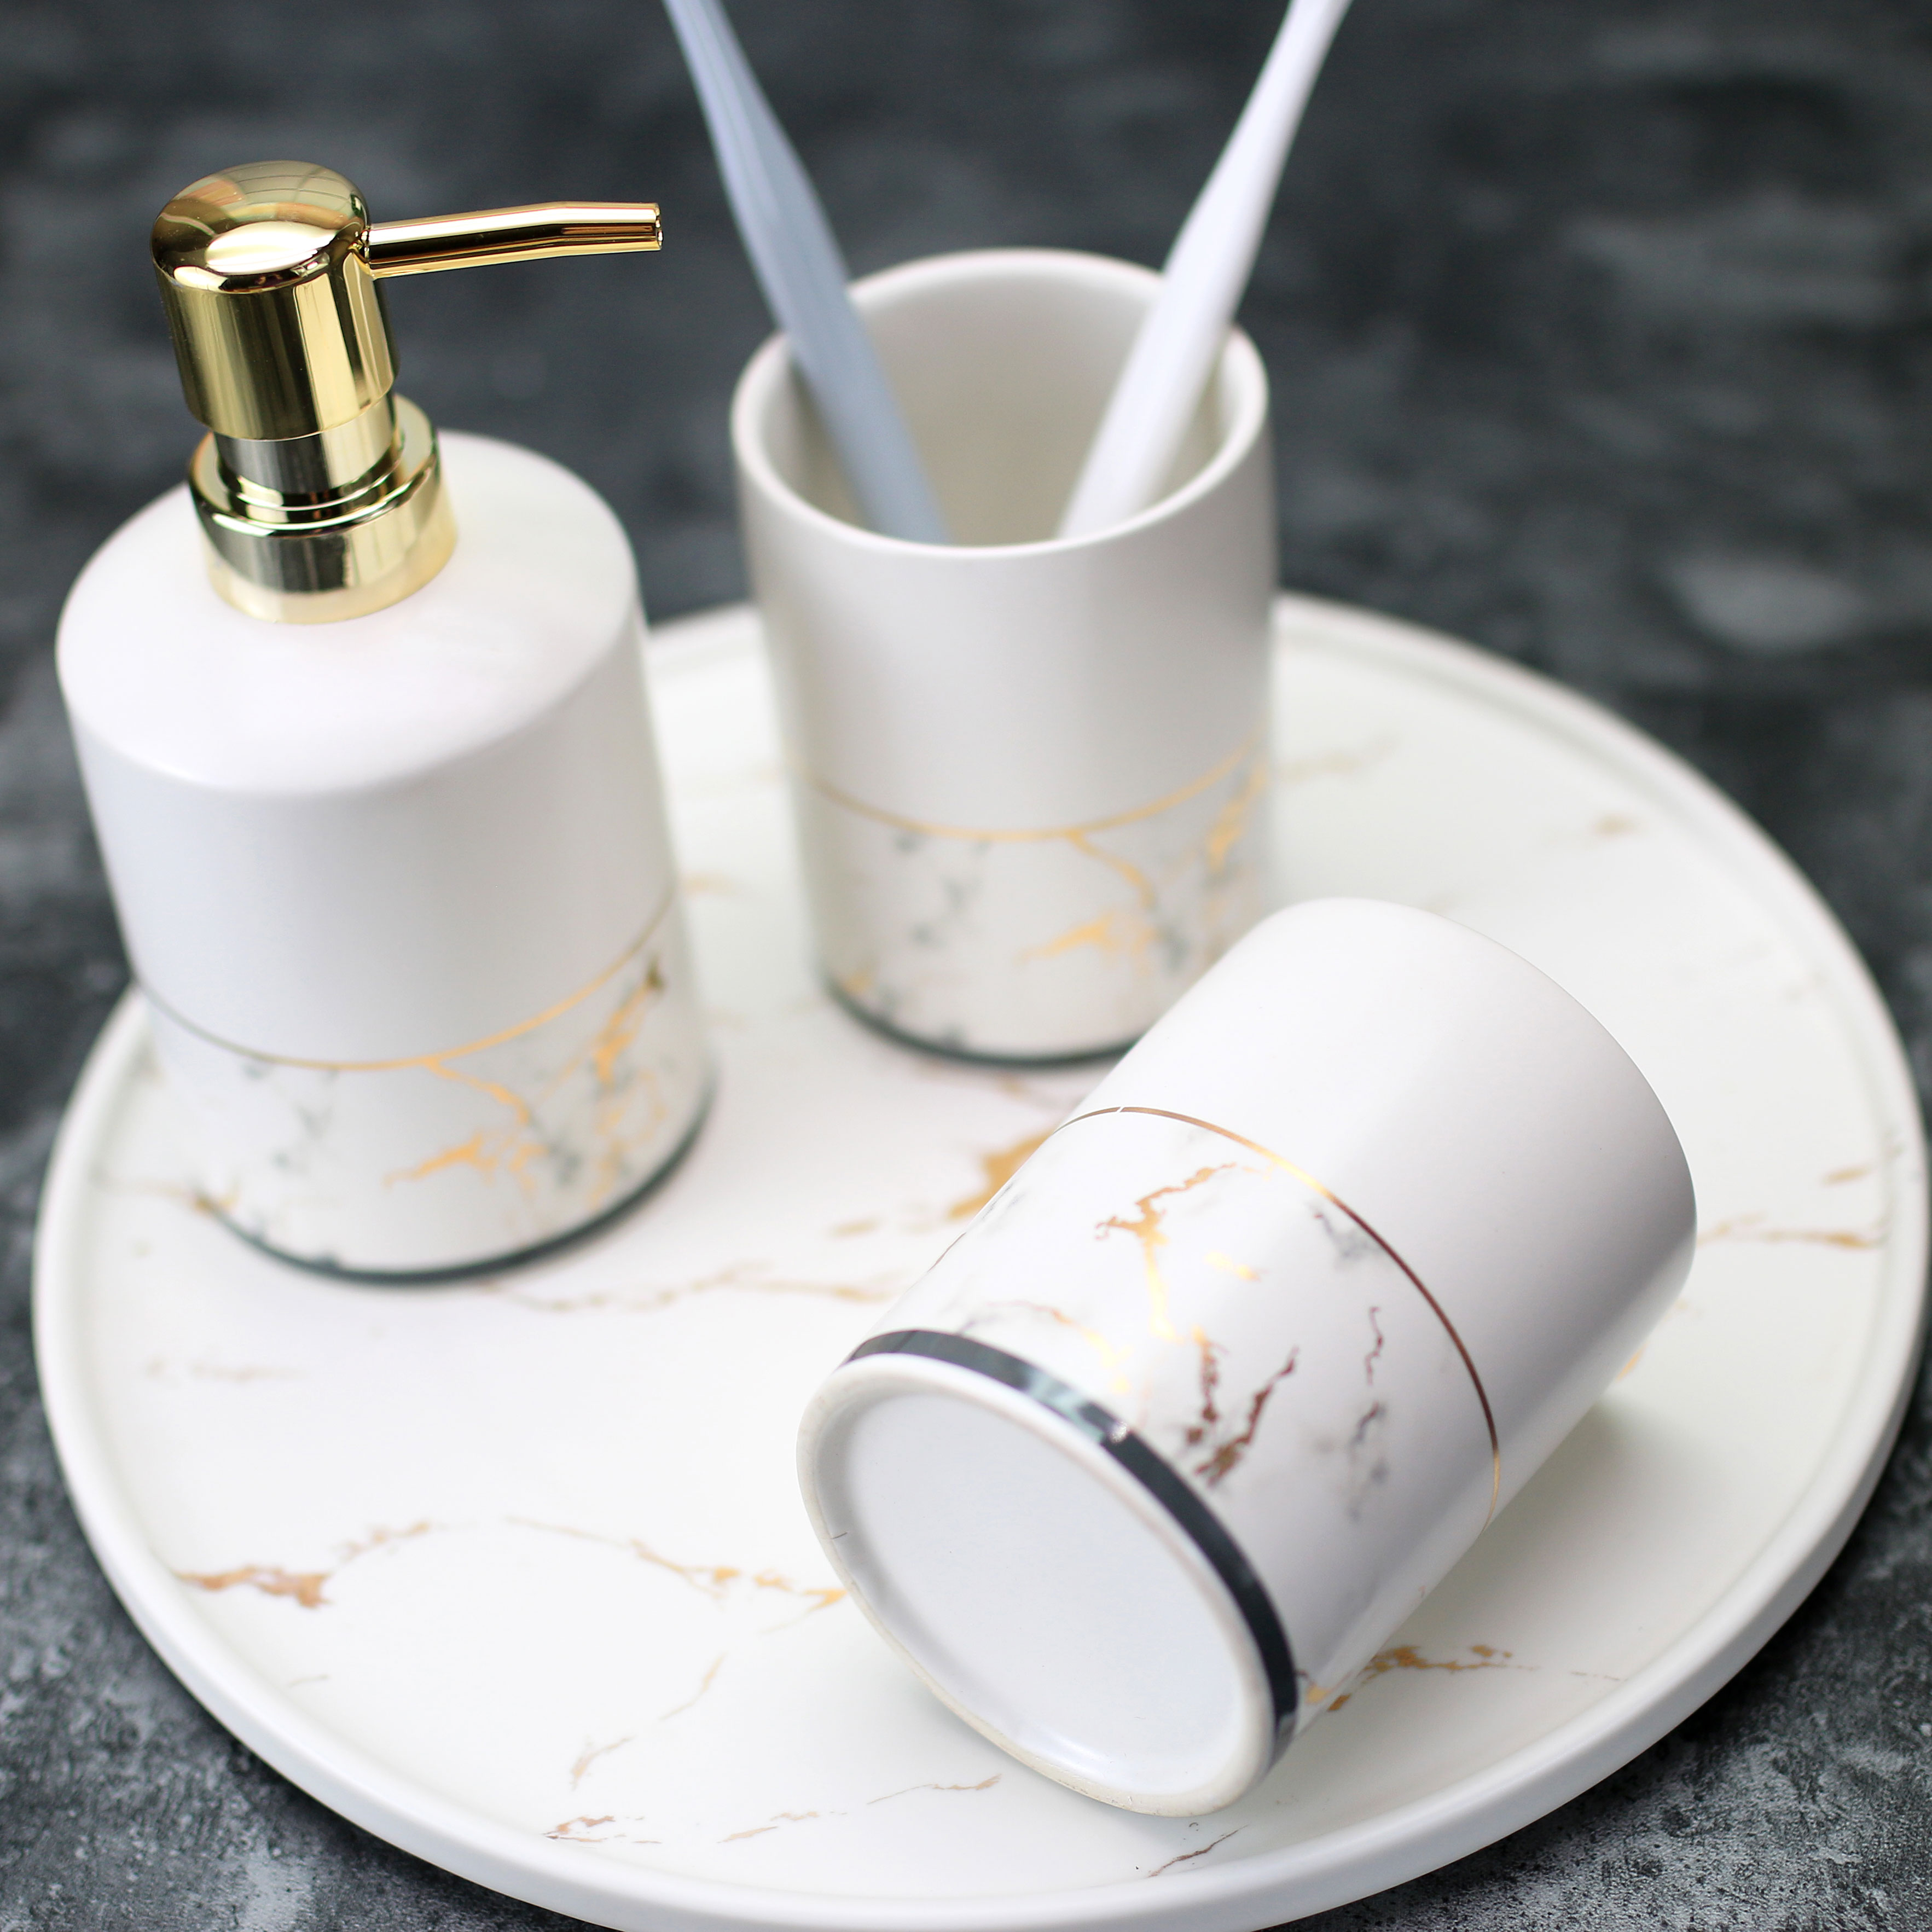 Ceramic imitation marble Bathroom Accessory Set Washing Tools Bottle Mouthwash Cup Soap Toothbrush Holder Household Articles